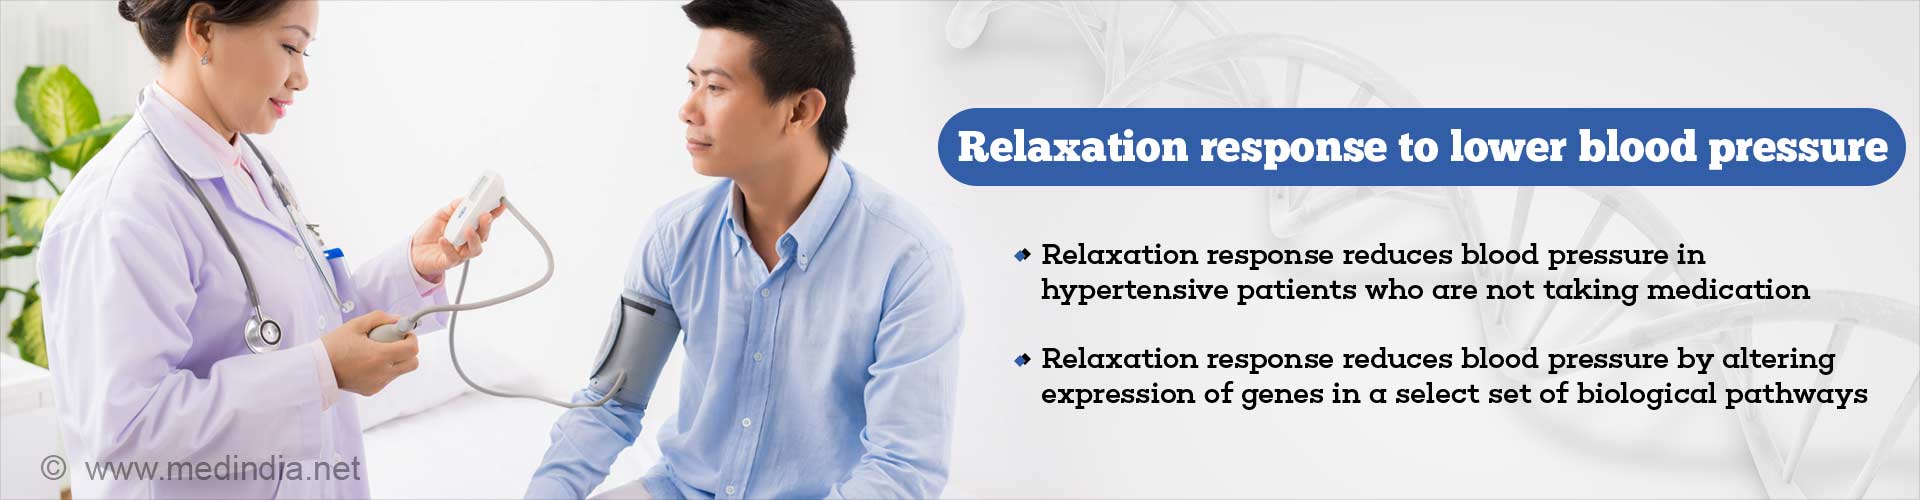 relaxation response to lower blood pressure
- relaxation response reduce blood pressure in hypertensive patients who are not taking medication
- relaxation response reduces blood pressure by altering expression of genes in a select set of biological pathways